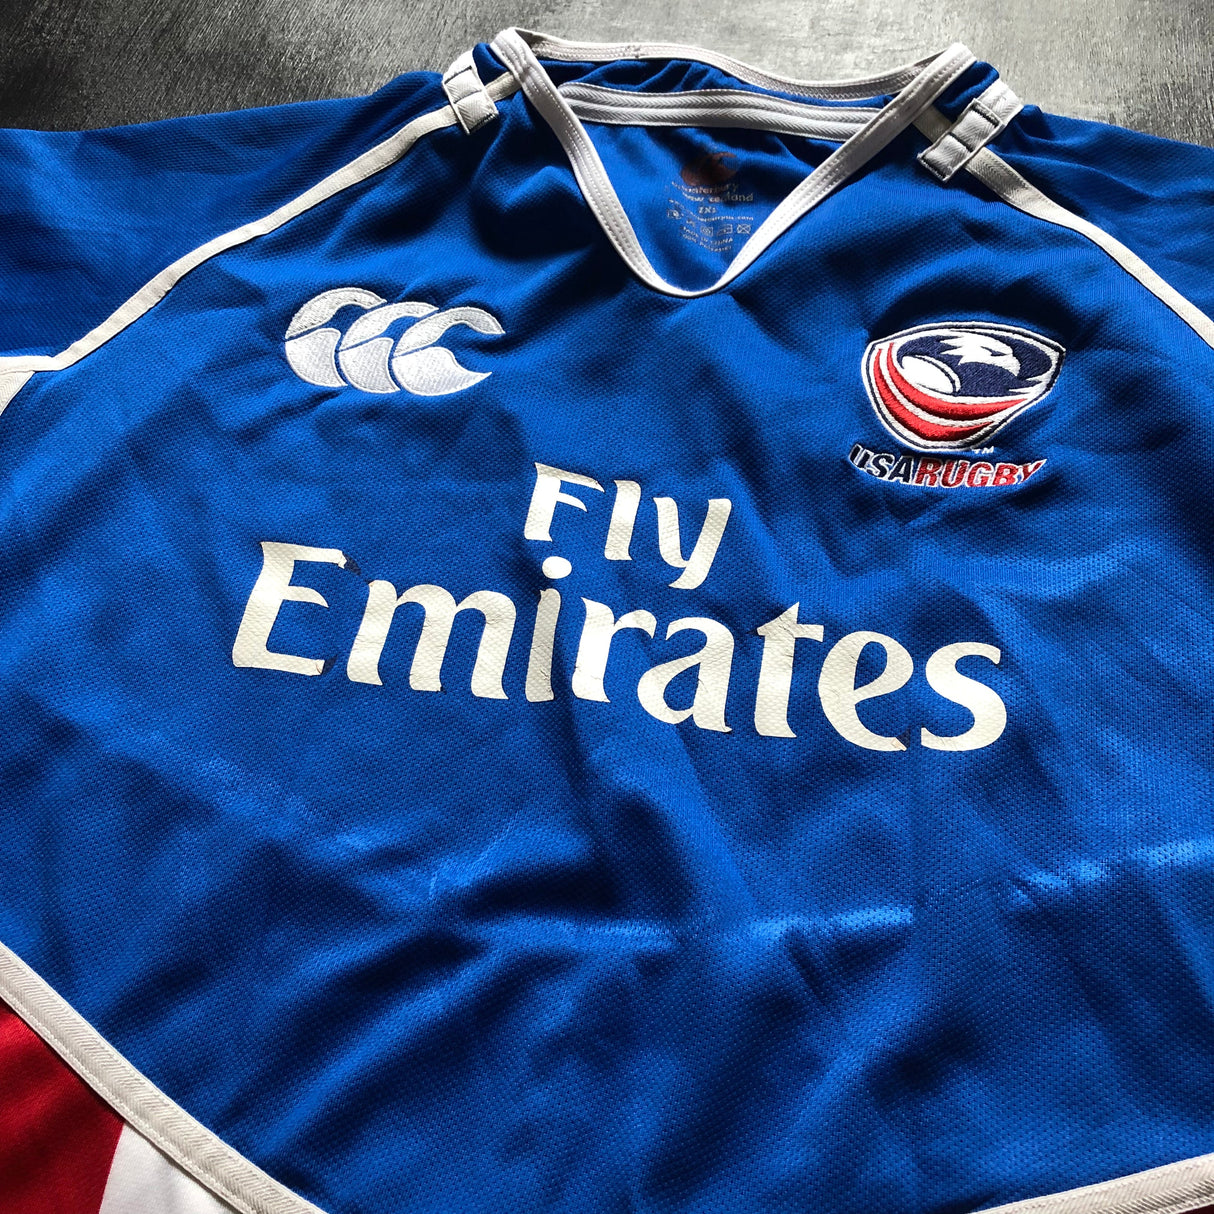 USA National Rugby Team Jersey 2011/12 2XL Underdog Rugby - The Tier 2 Rugby Shop 